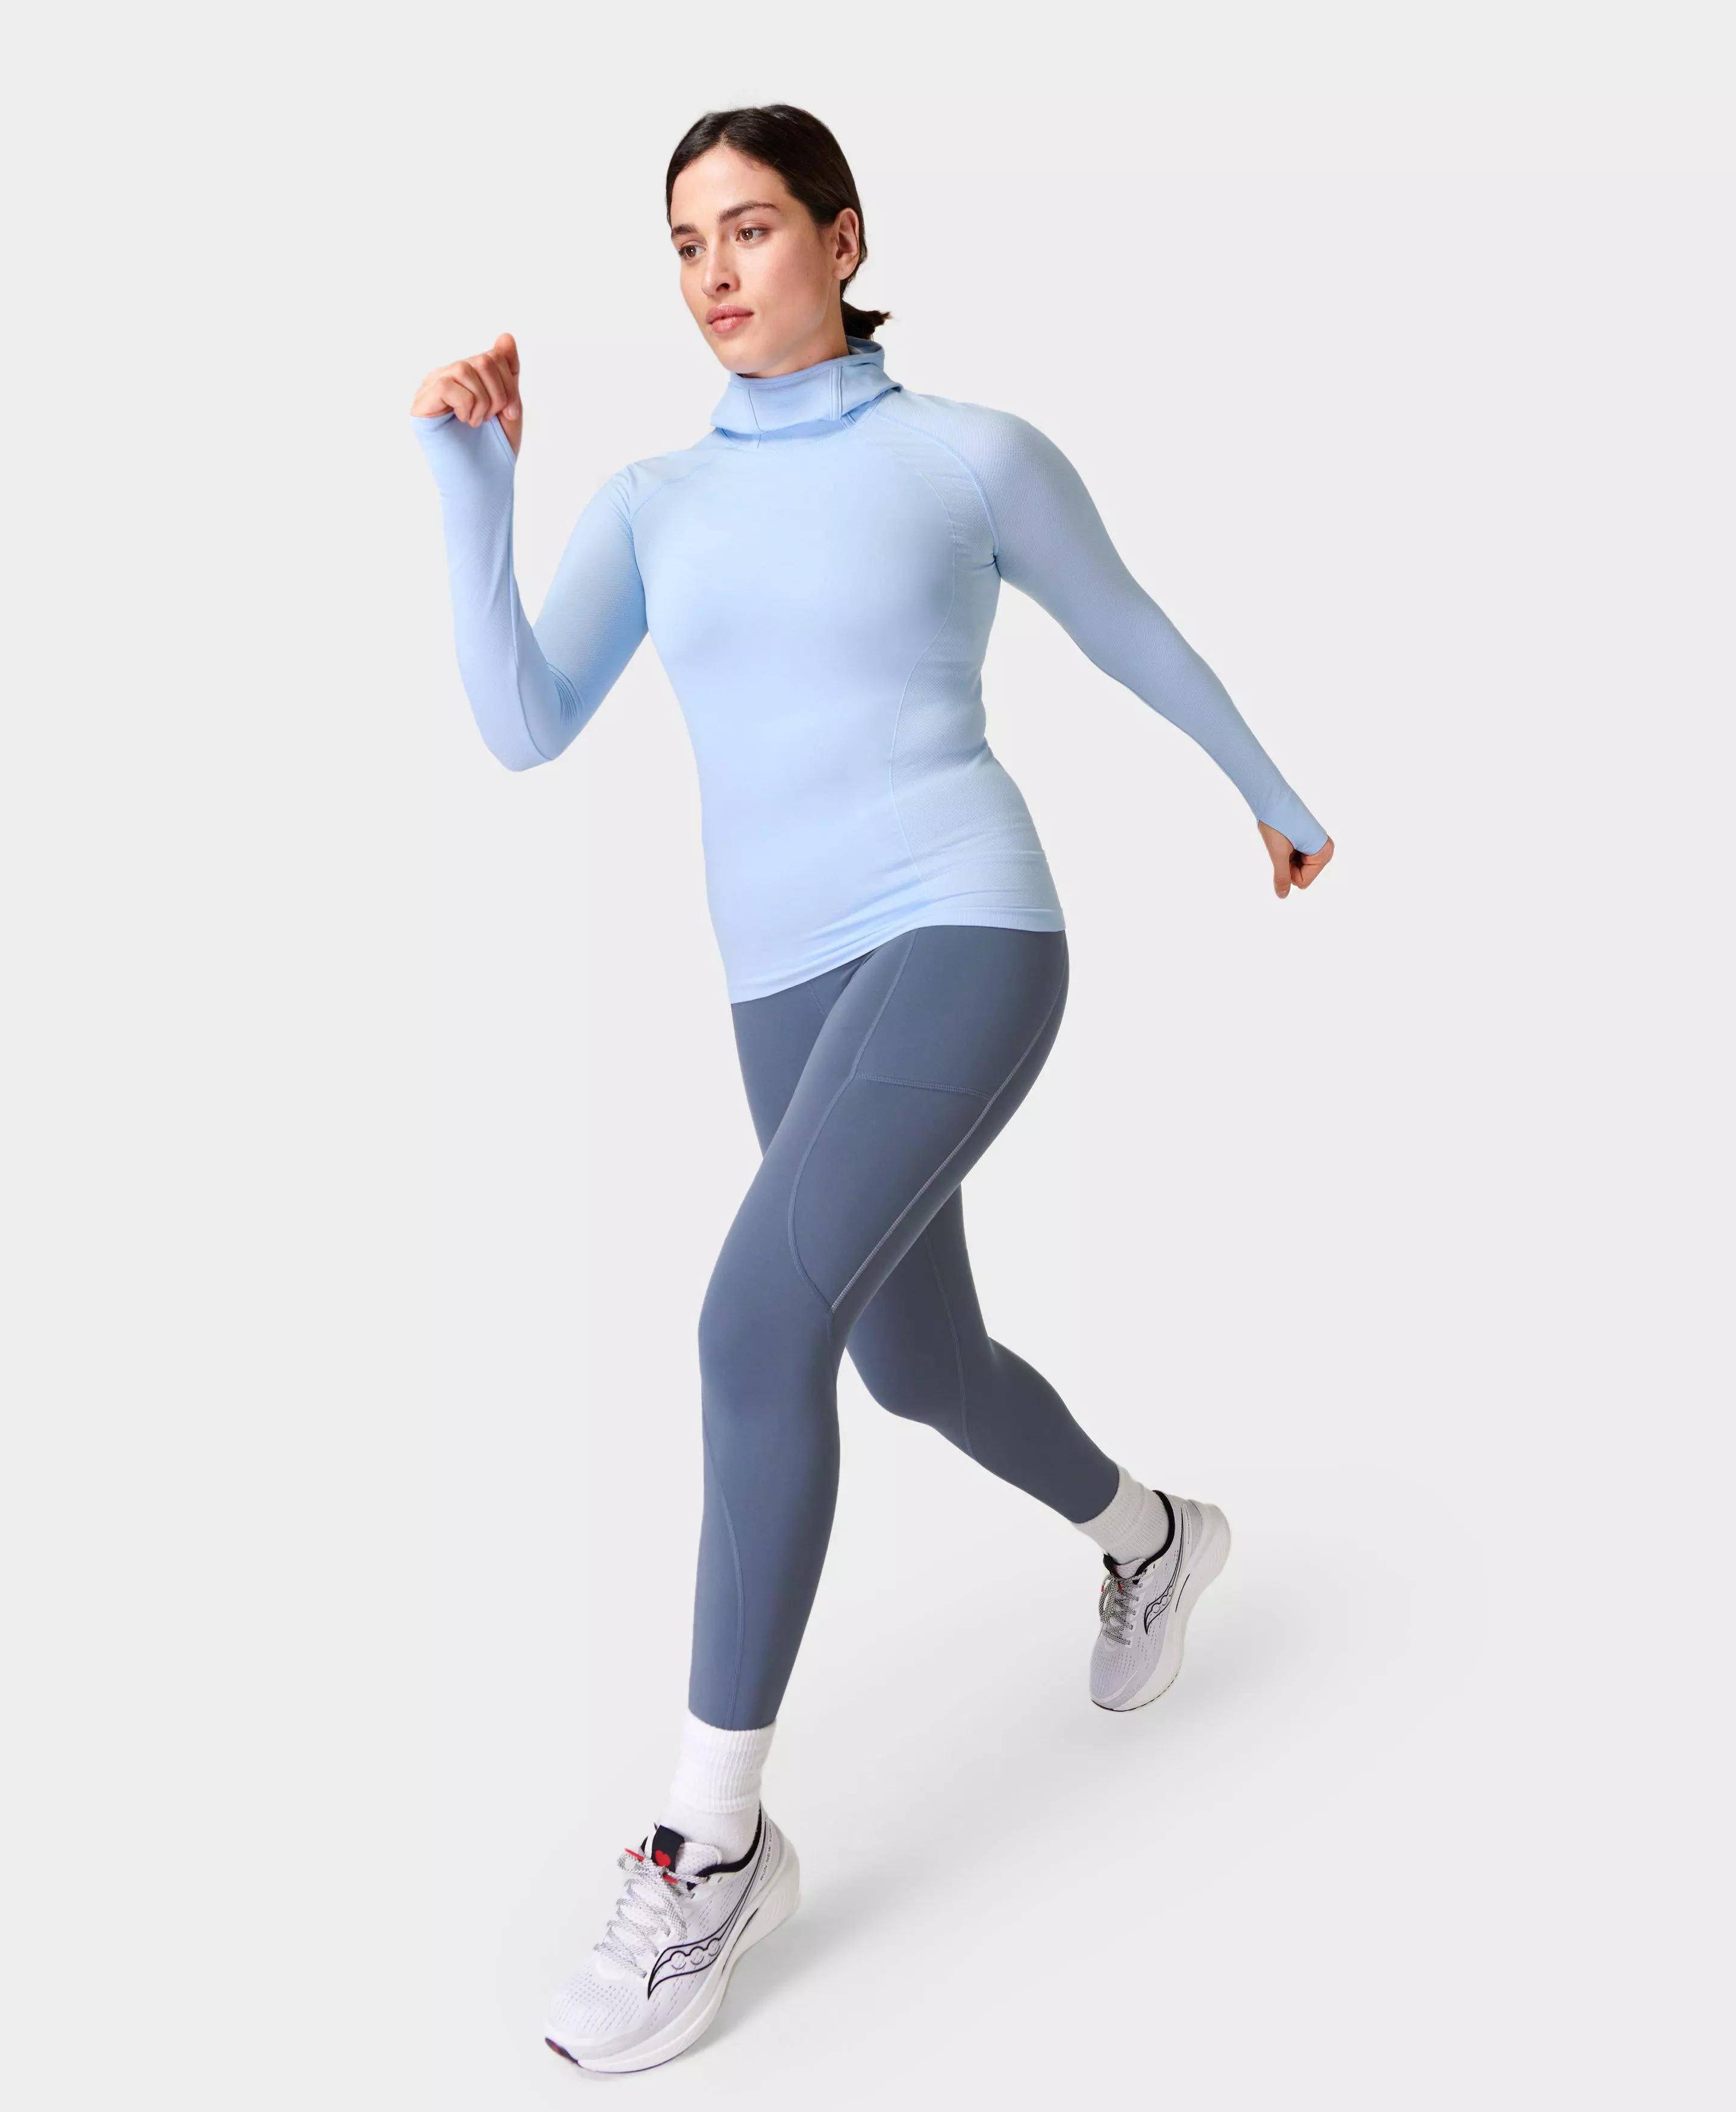 Pockets For Women - Therma Boost 2.0 7/8 Running Leggings